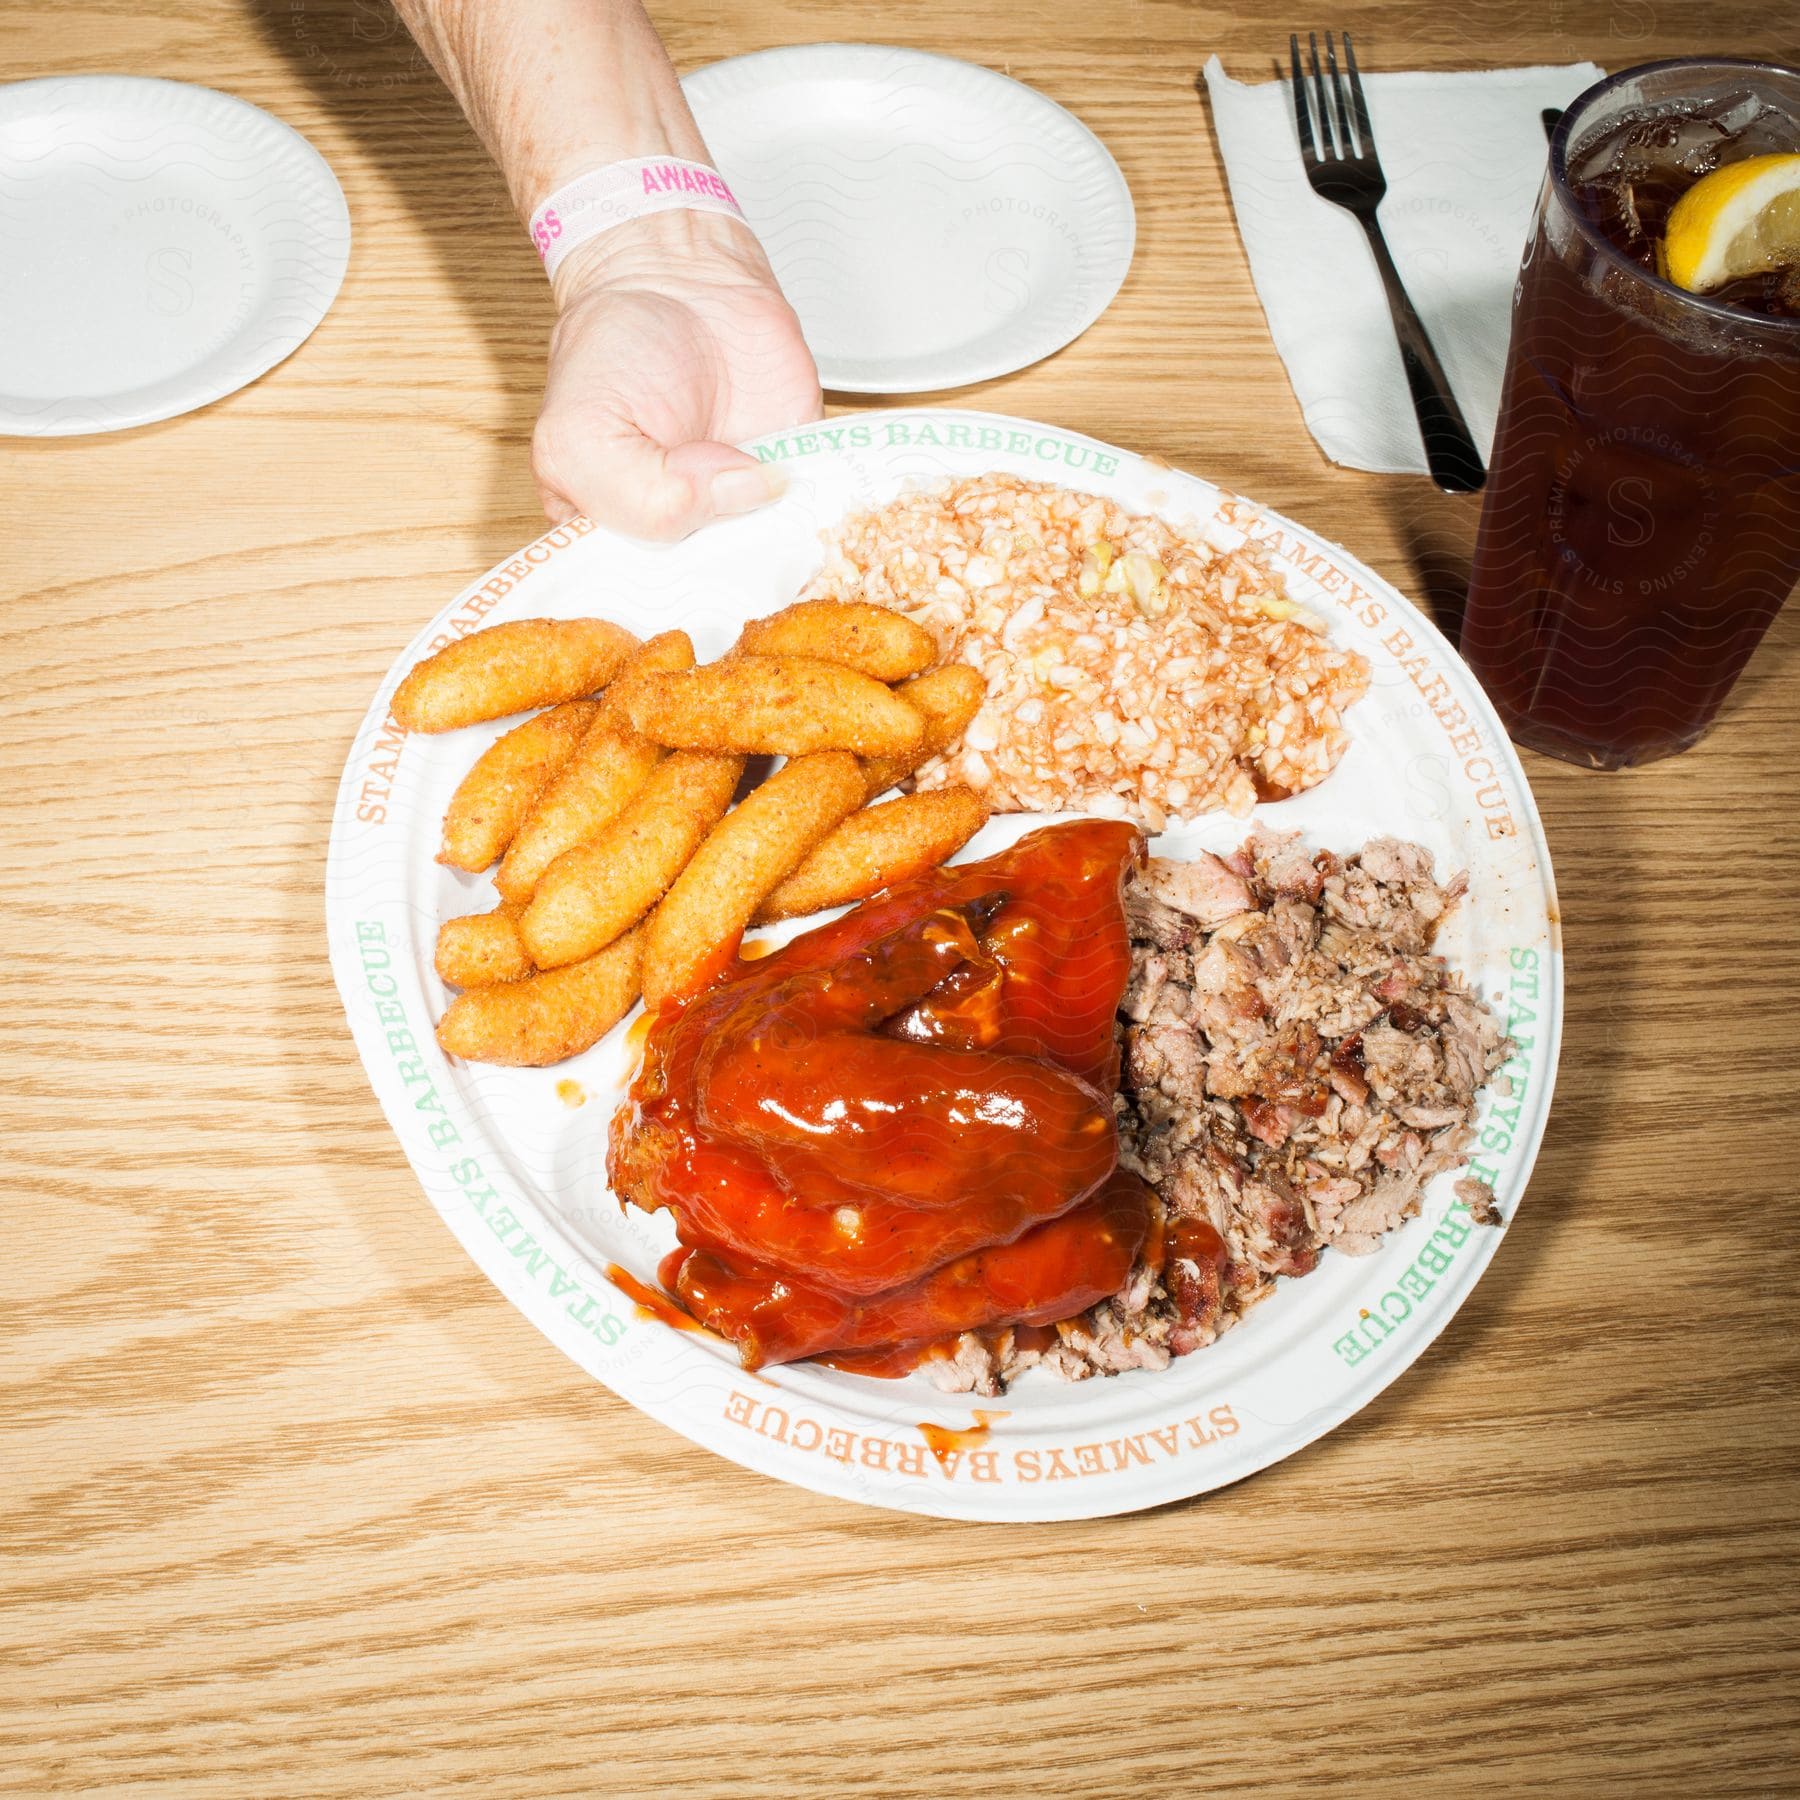 A hand serving a plate with a full hearty meal on a table